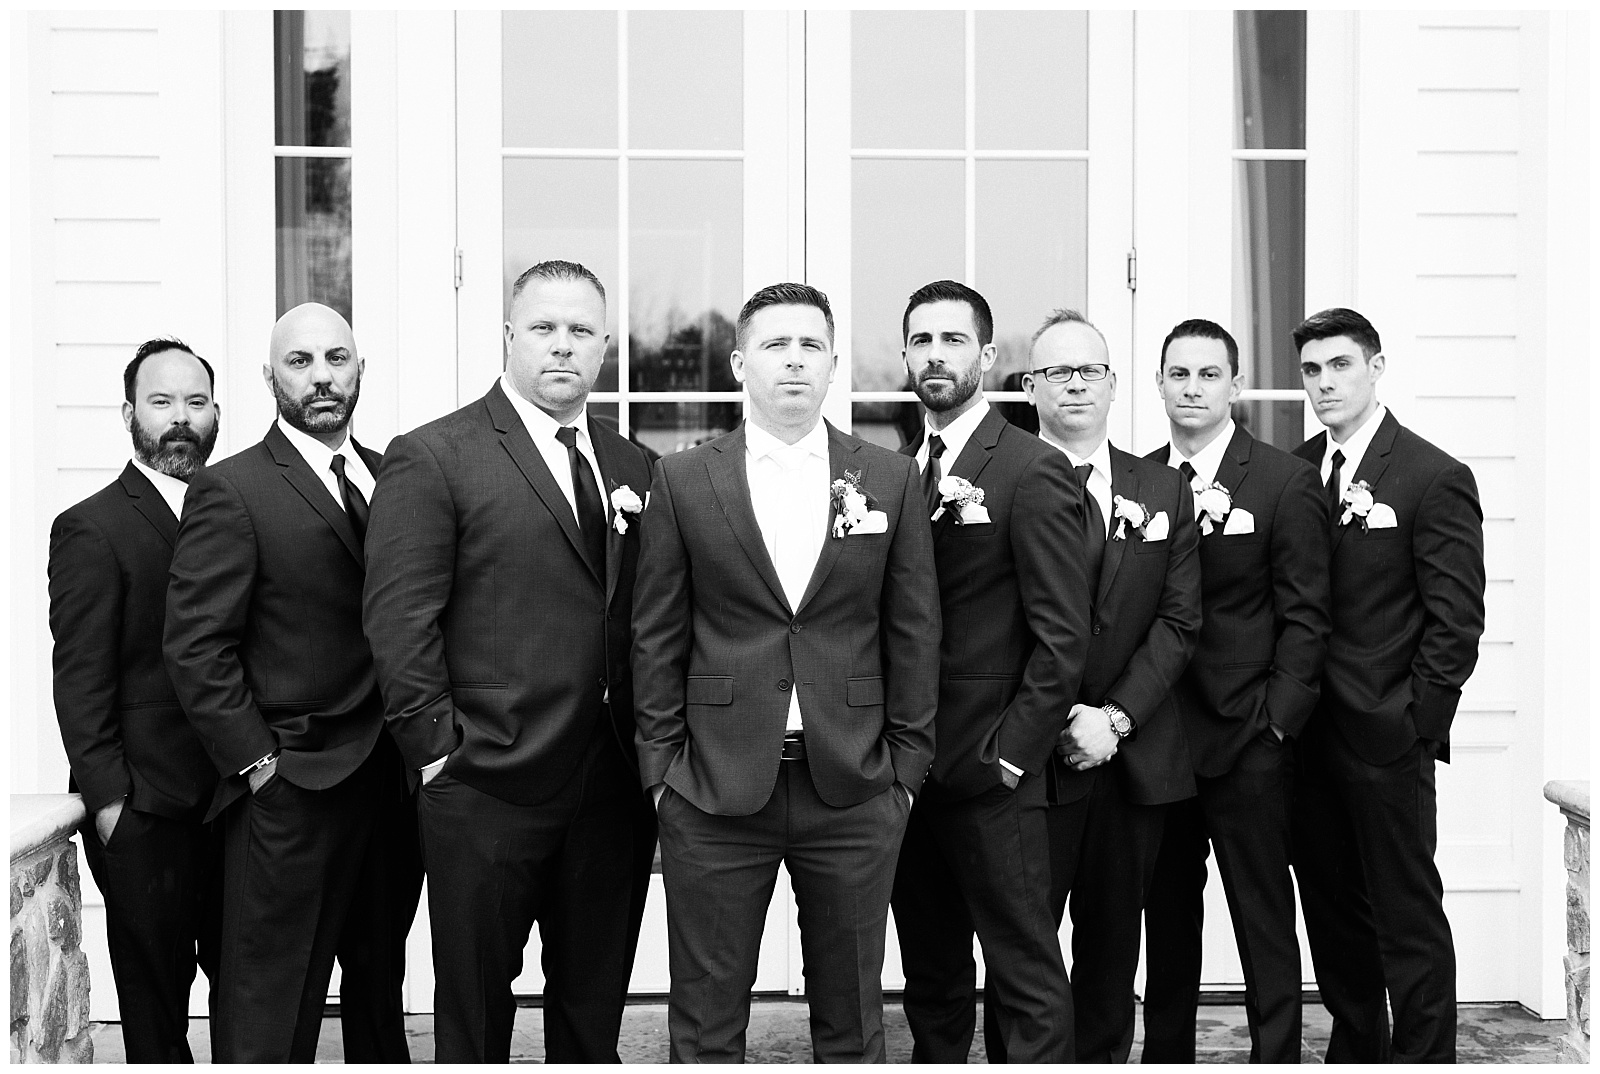 Black and white photo of groomsmen standing together.